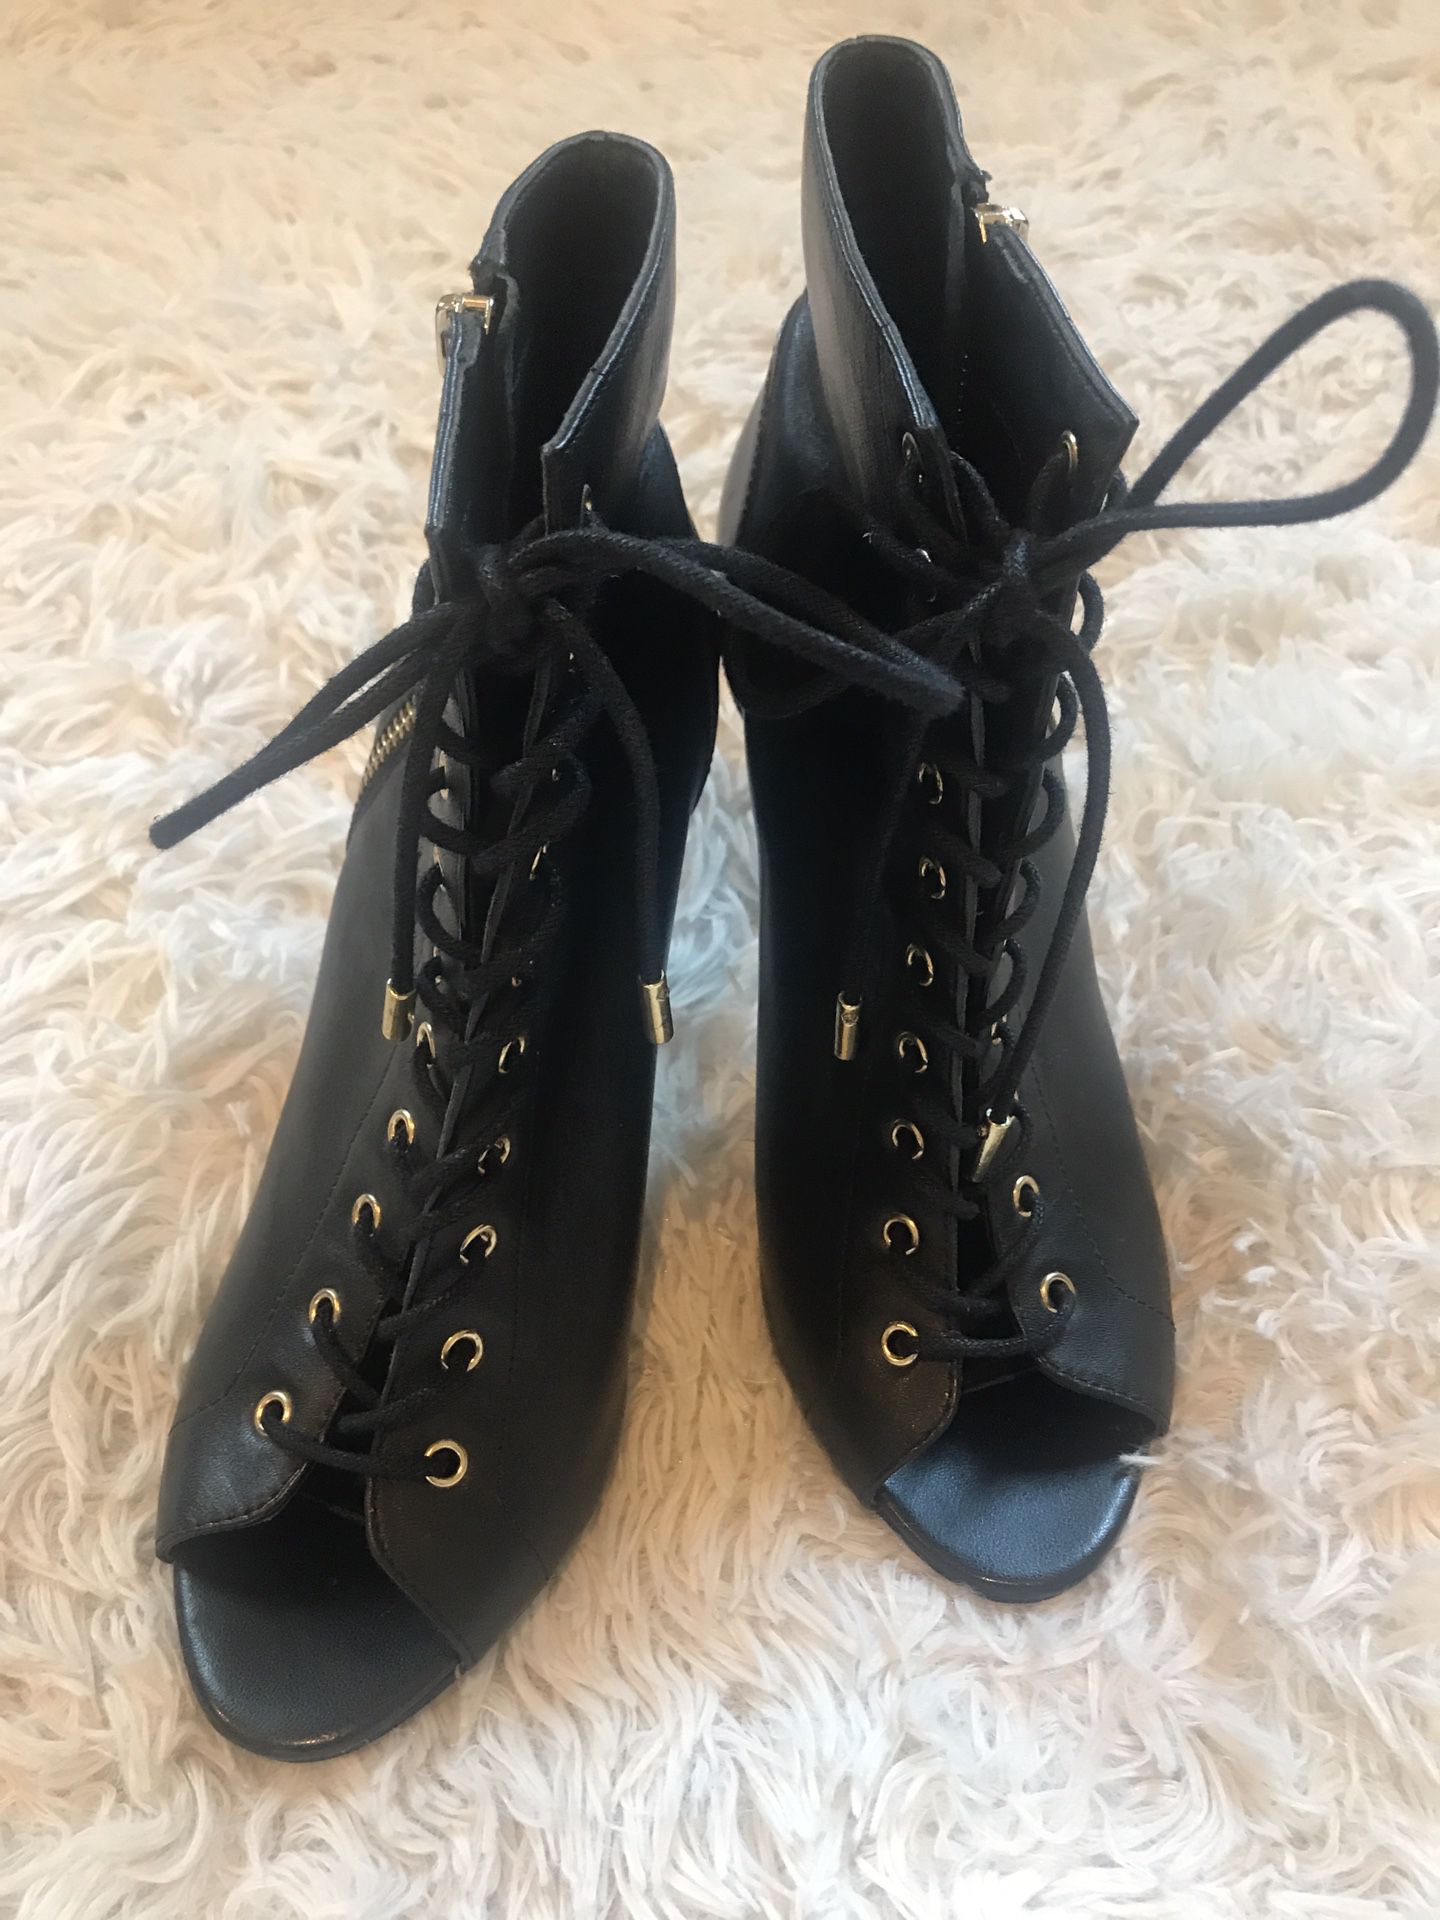 Steve Madden Gladly Leather Bootie Size 7.